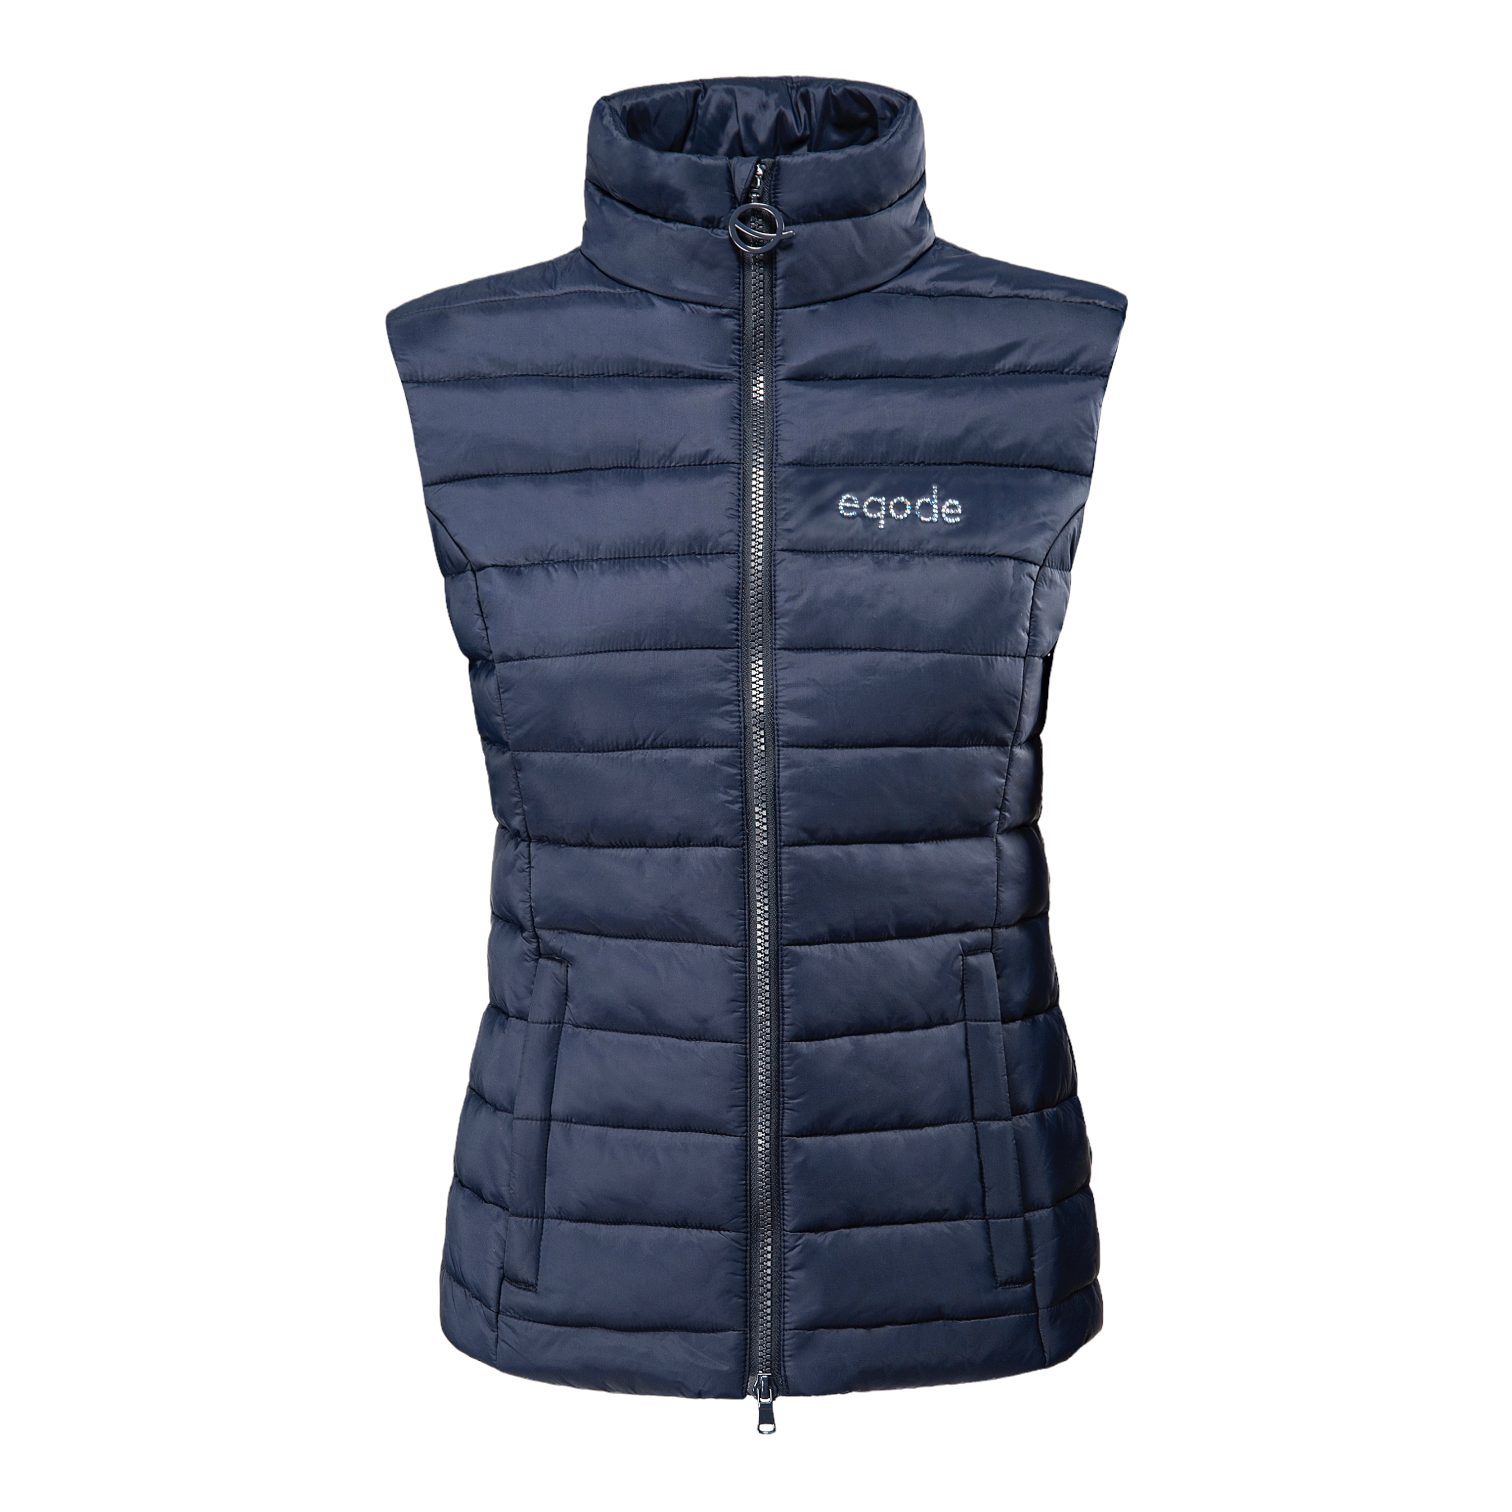 eqode by Equiline Reitweste Thermoweste Degry